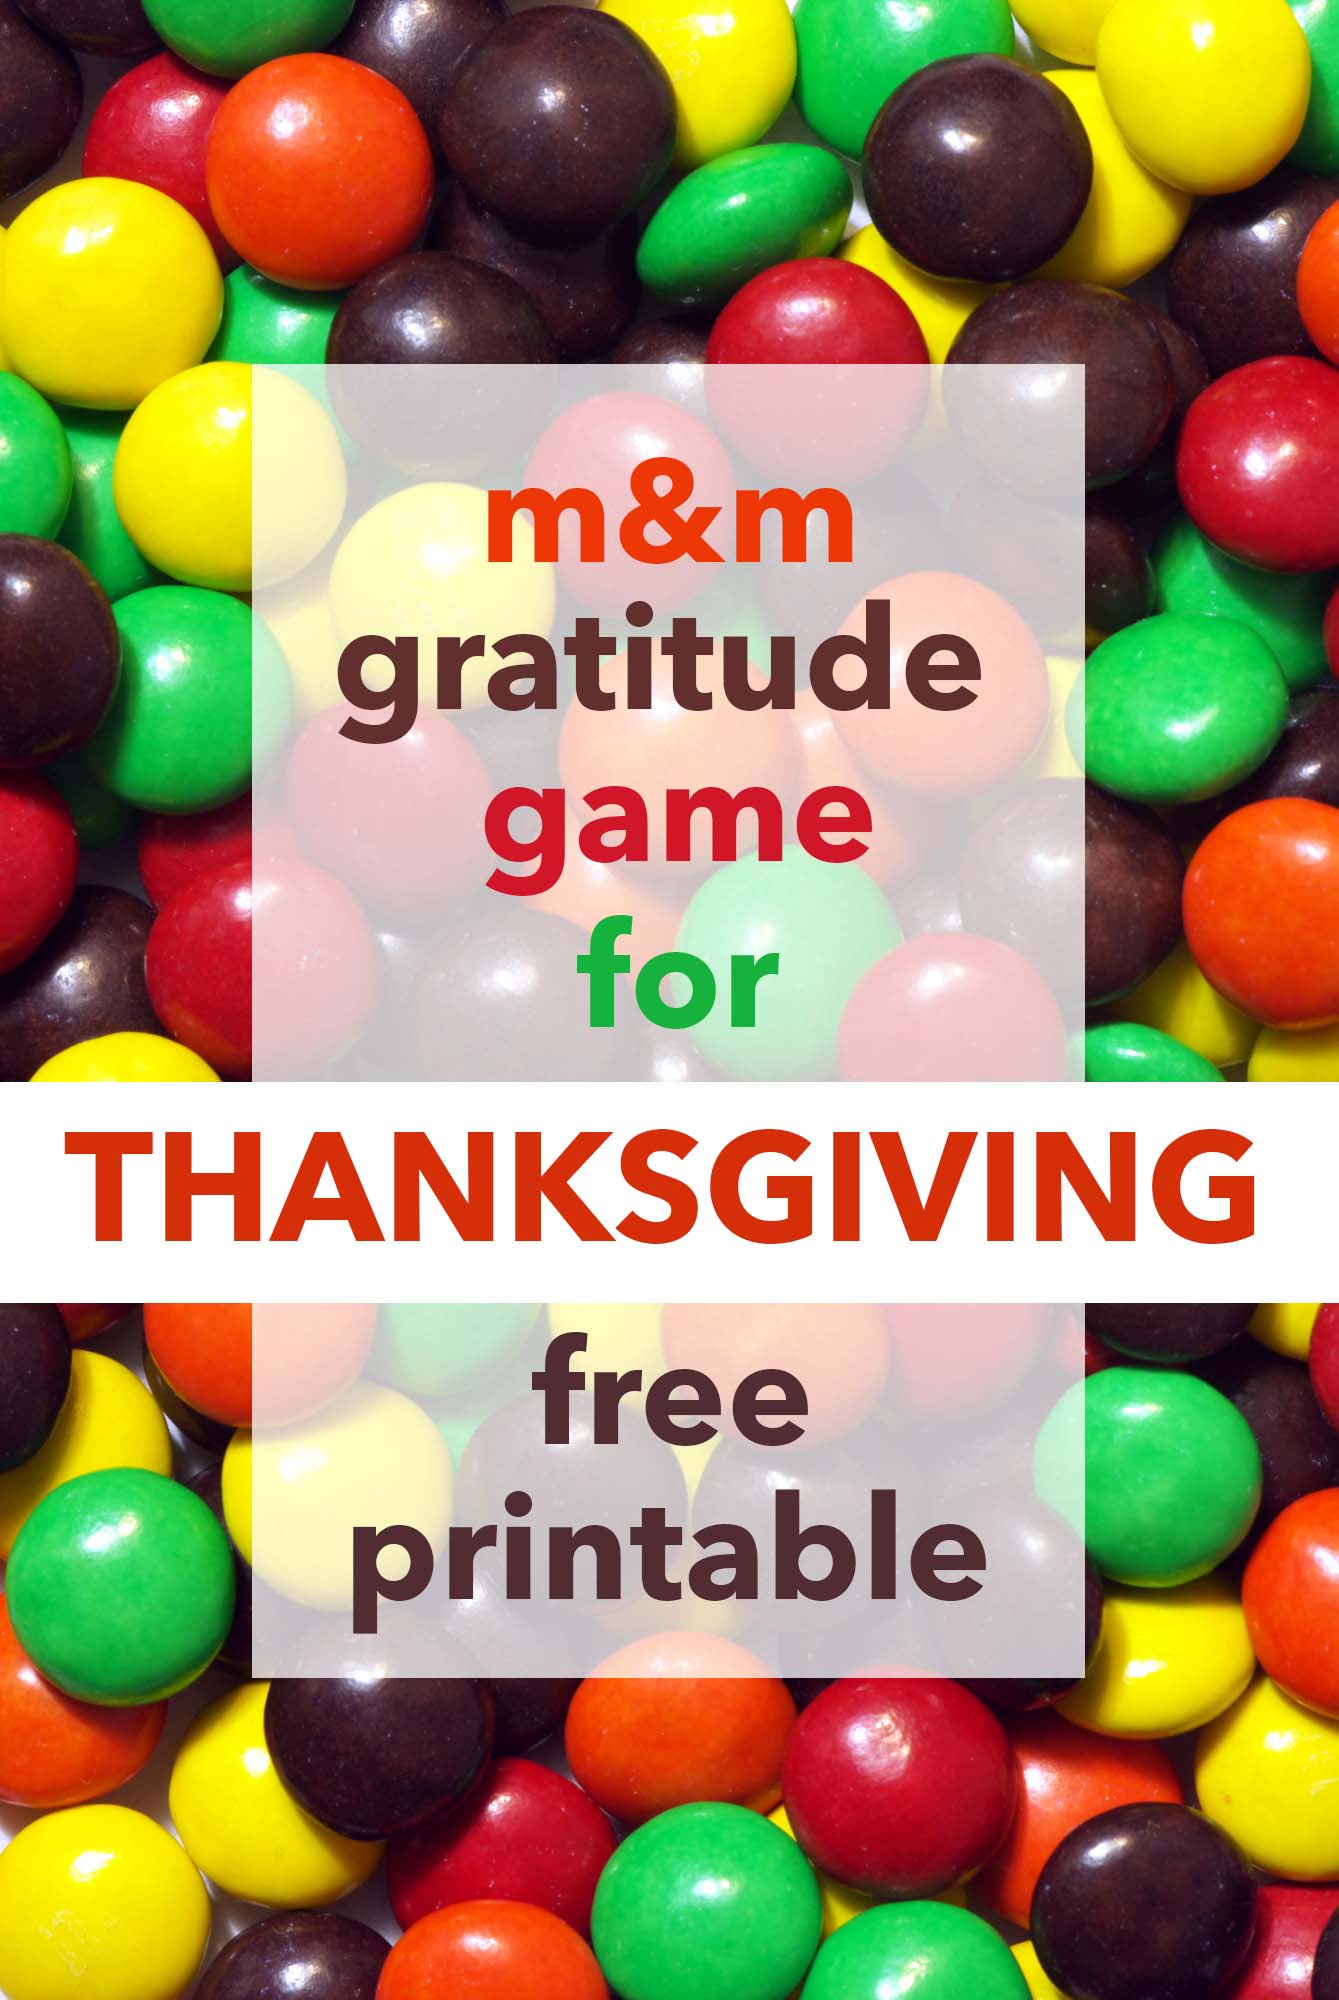 Looking for Thanksgiving games for family fun at the table? Use this free printable and some M&Ms to play an easy gratitude game around the family table. via @lara_neves